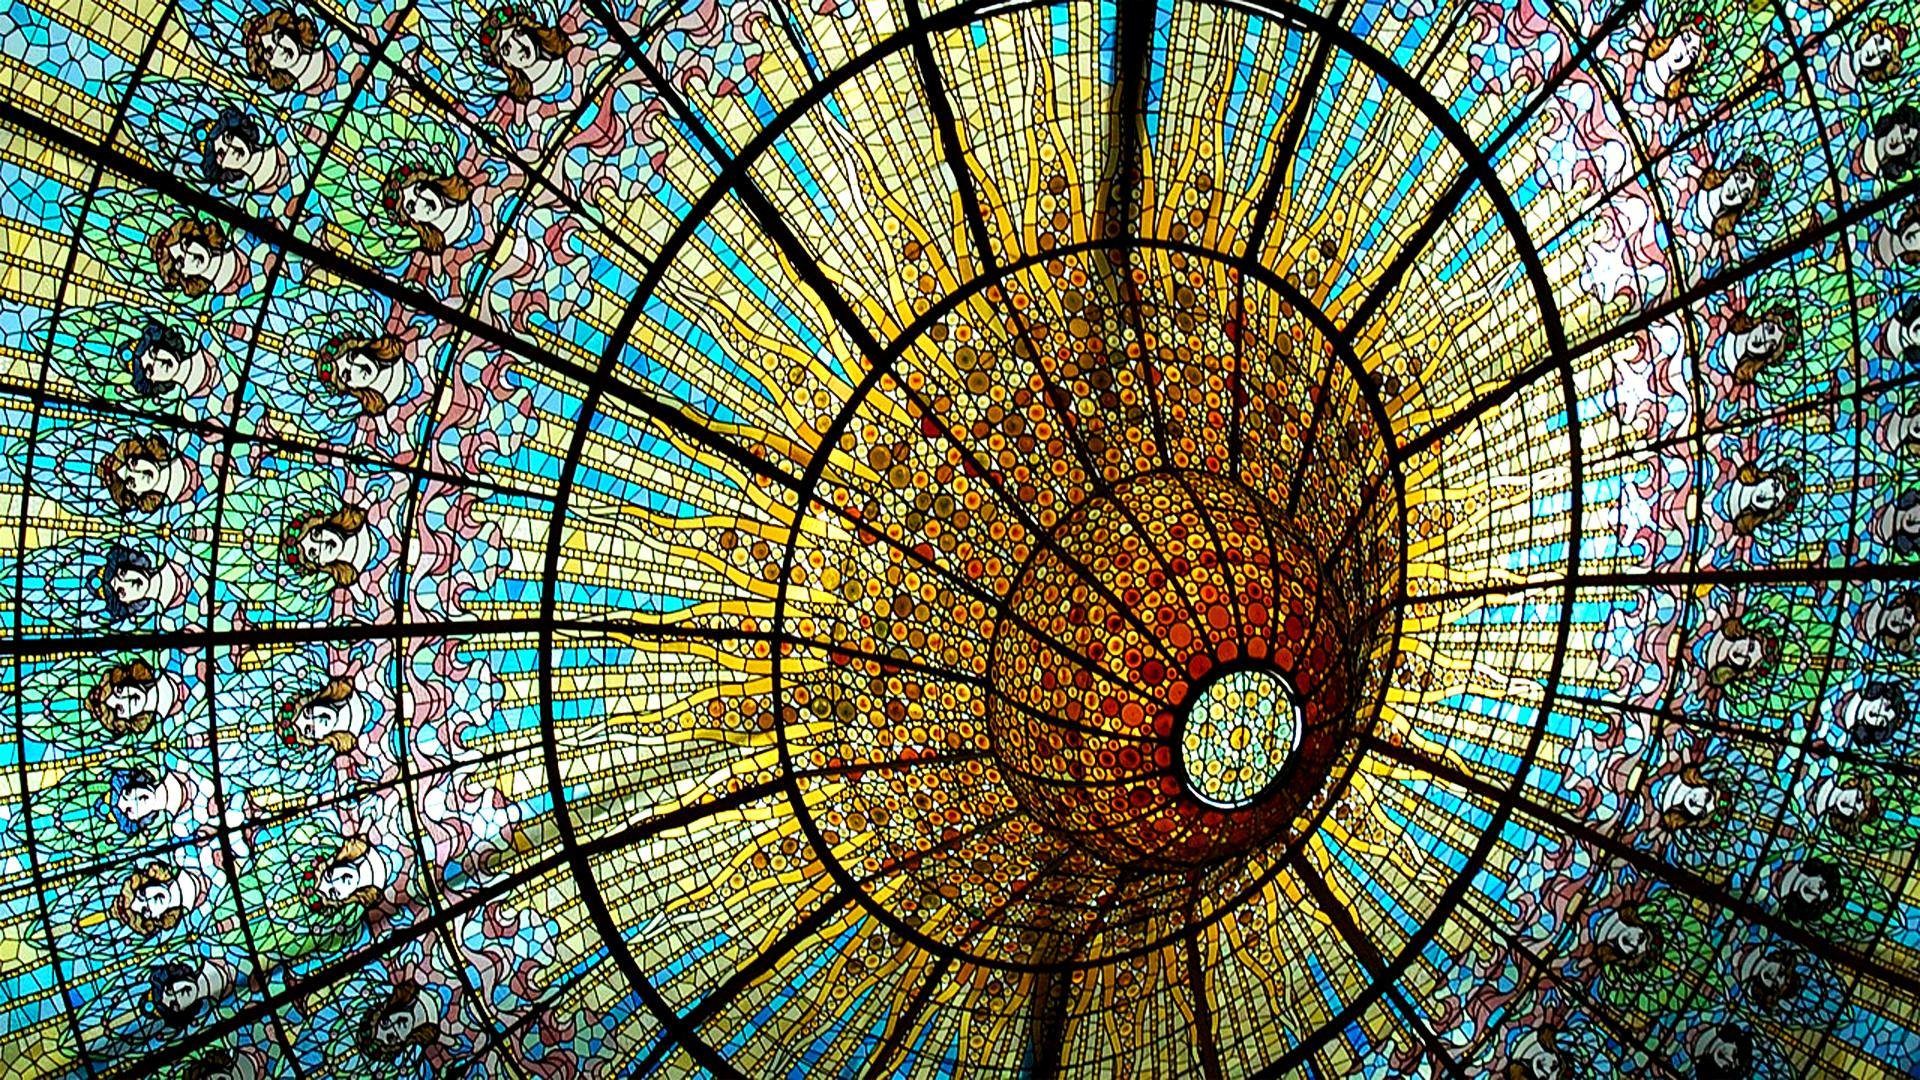 1920x1080, Home Â» Stained Glass Wallpapers Hd Backgrounds, - Grateful Dead  - 1920x1080 Wallpaper 